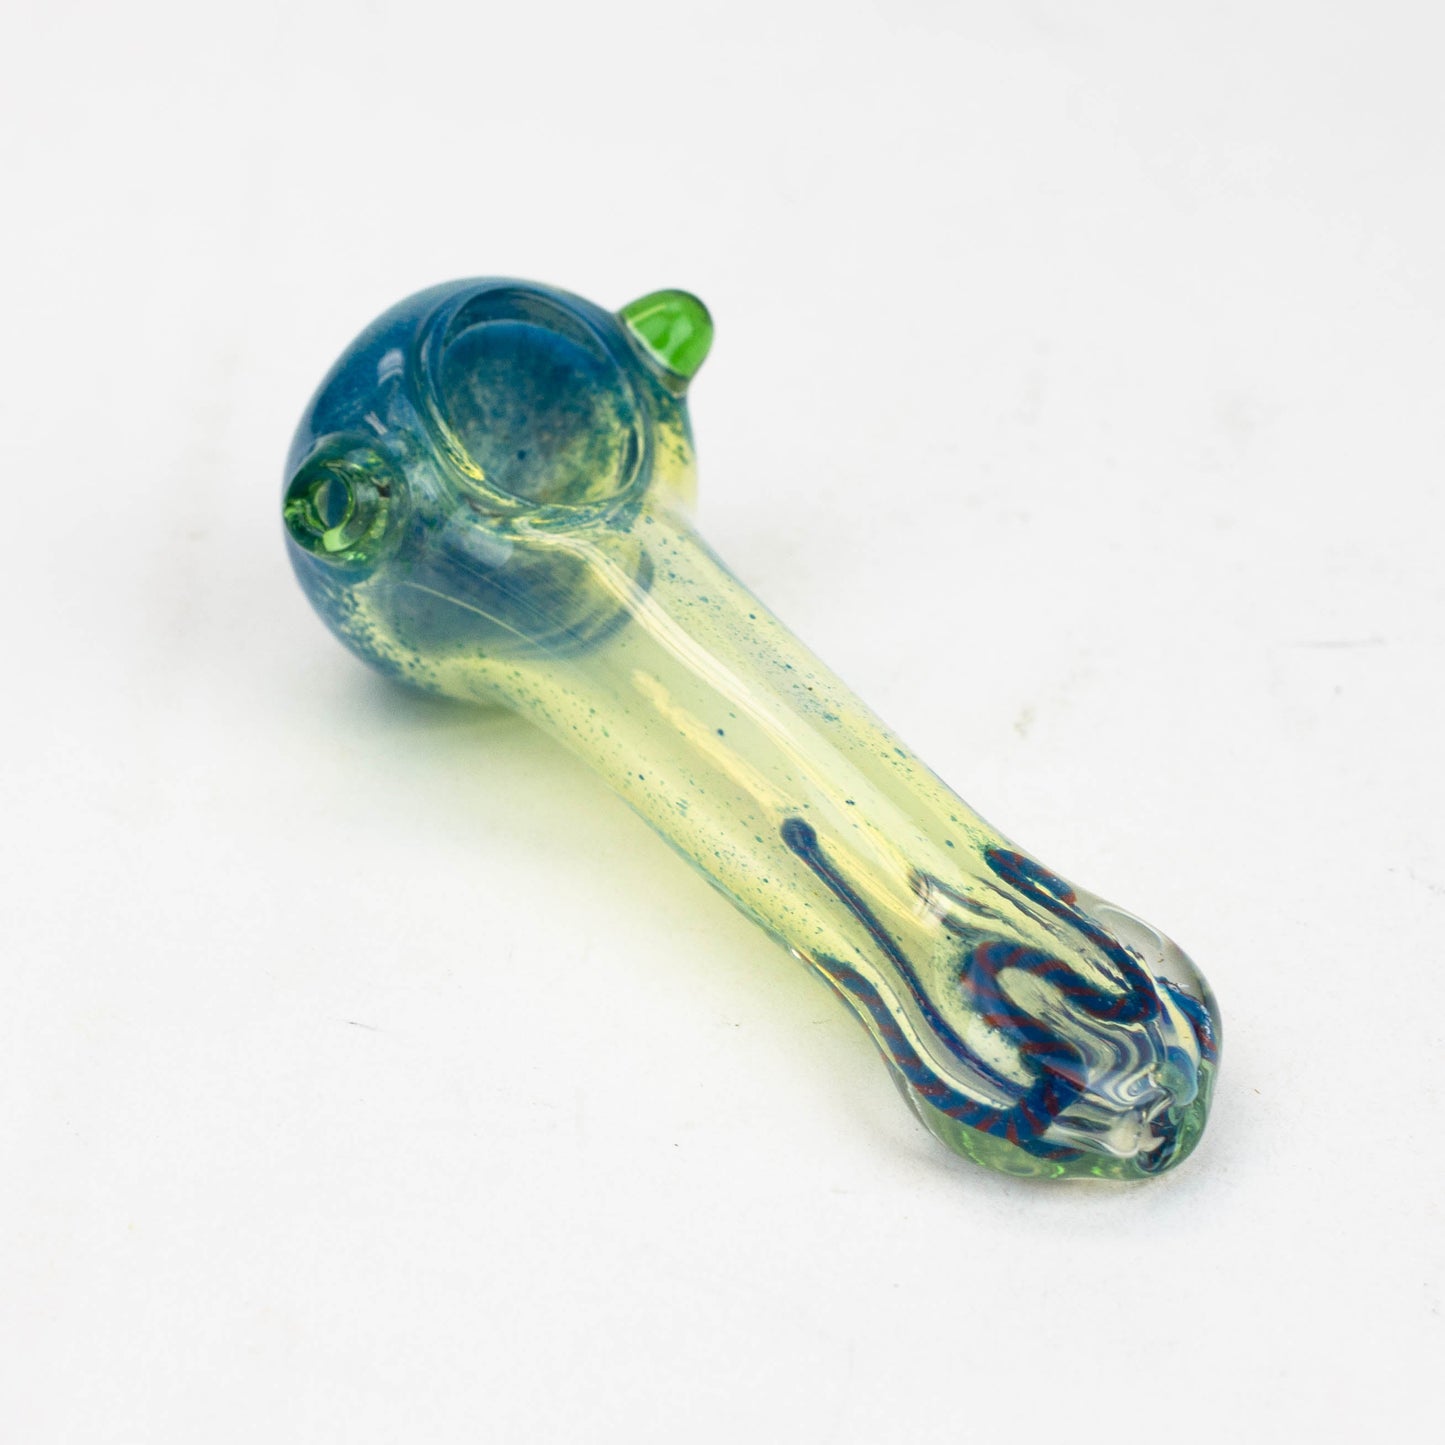 5" soft glass hand pipe [8982]_1